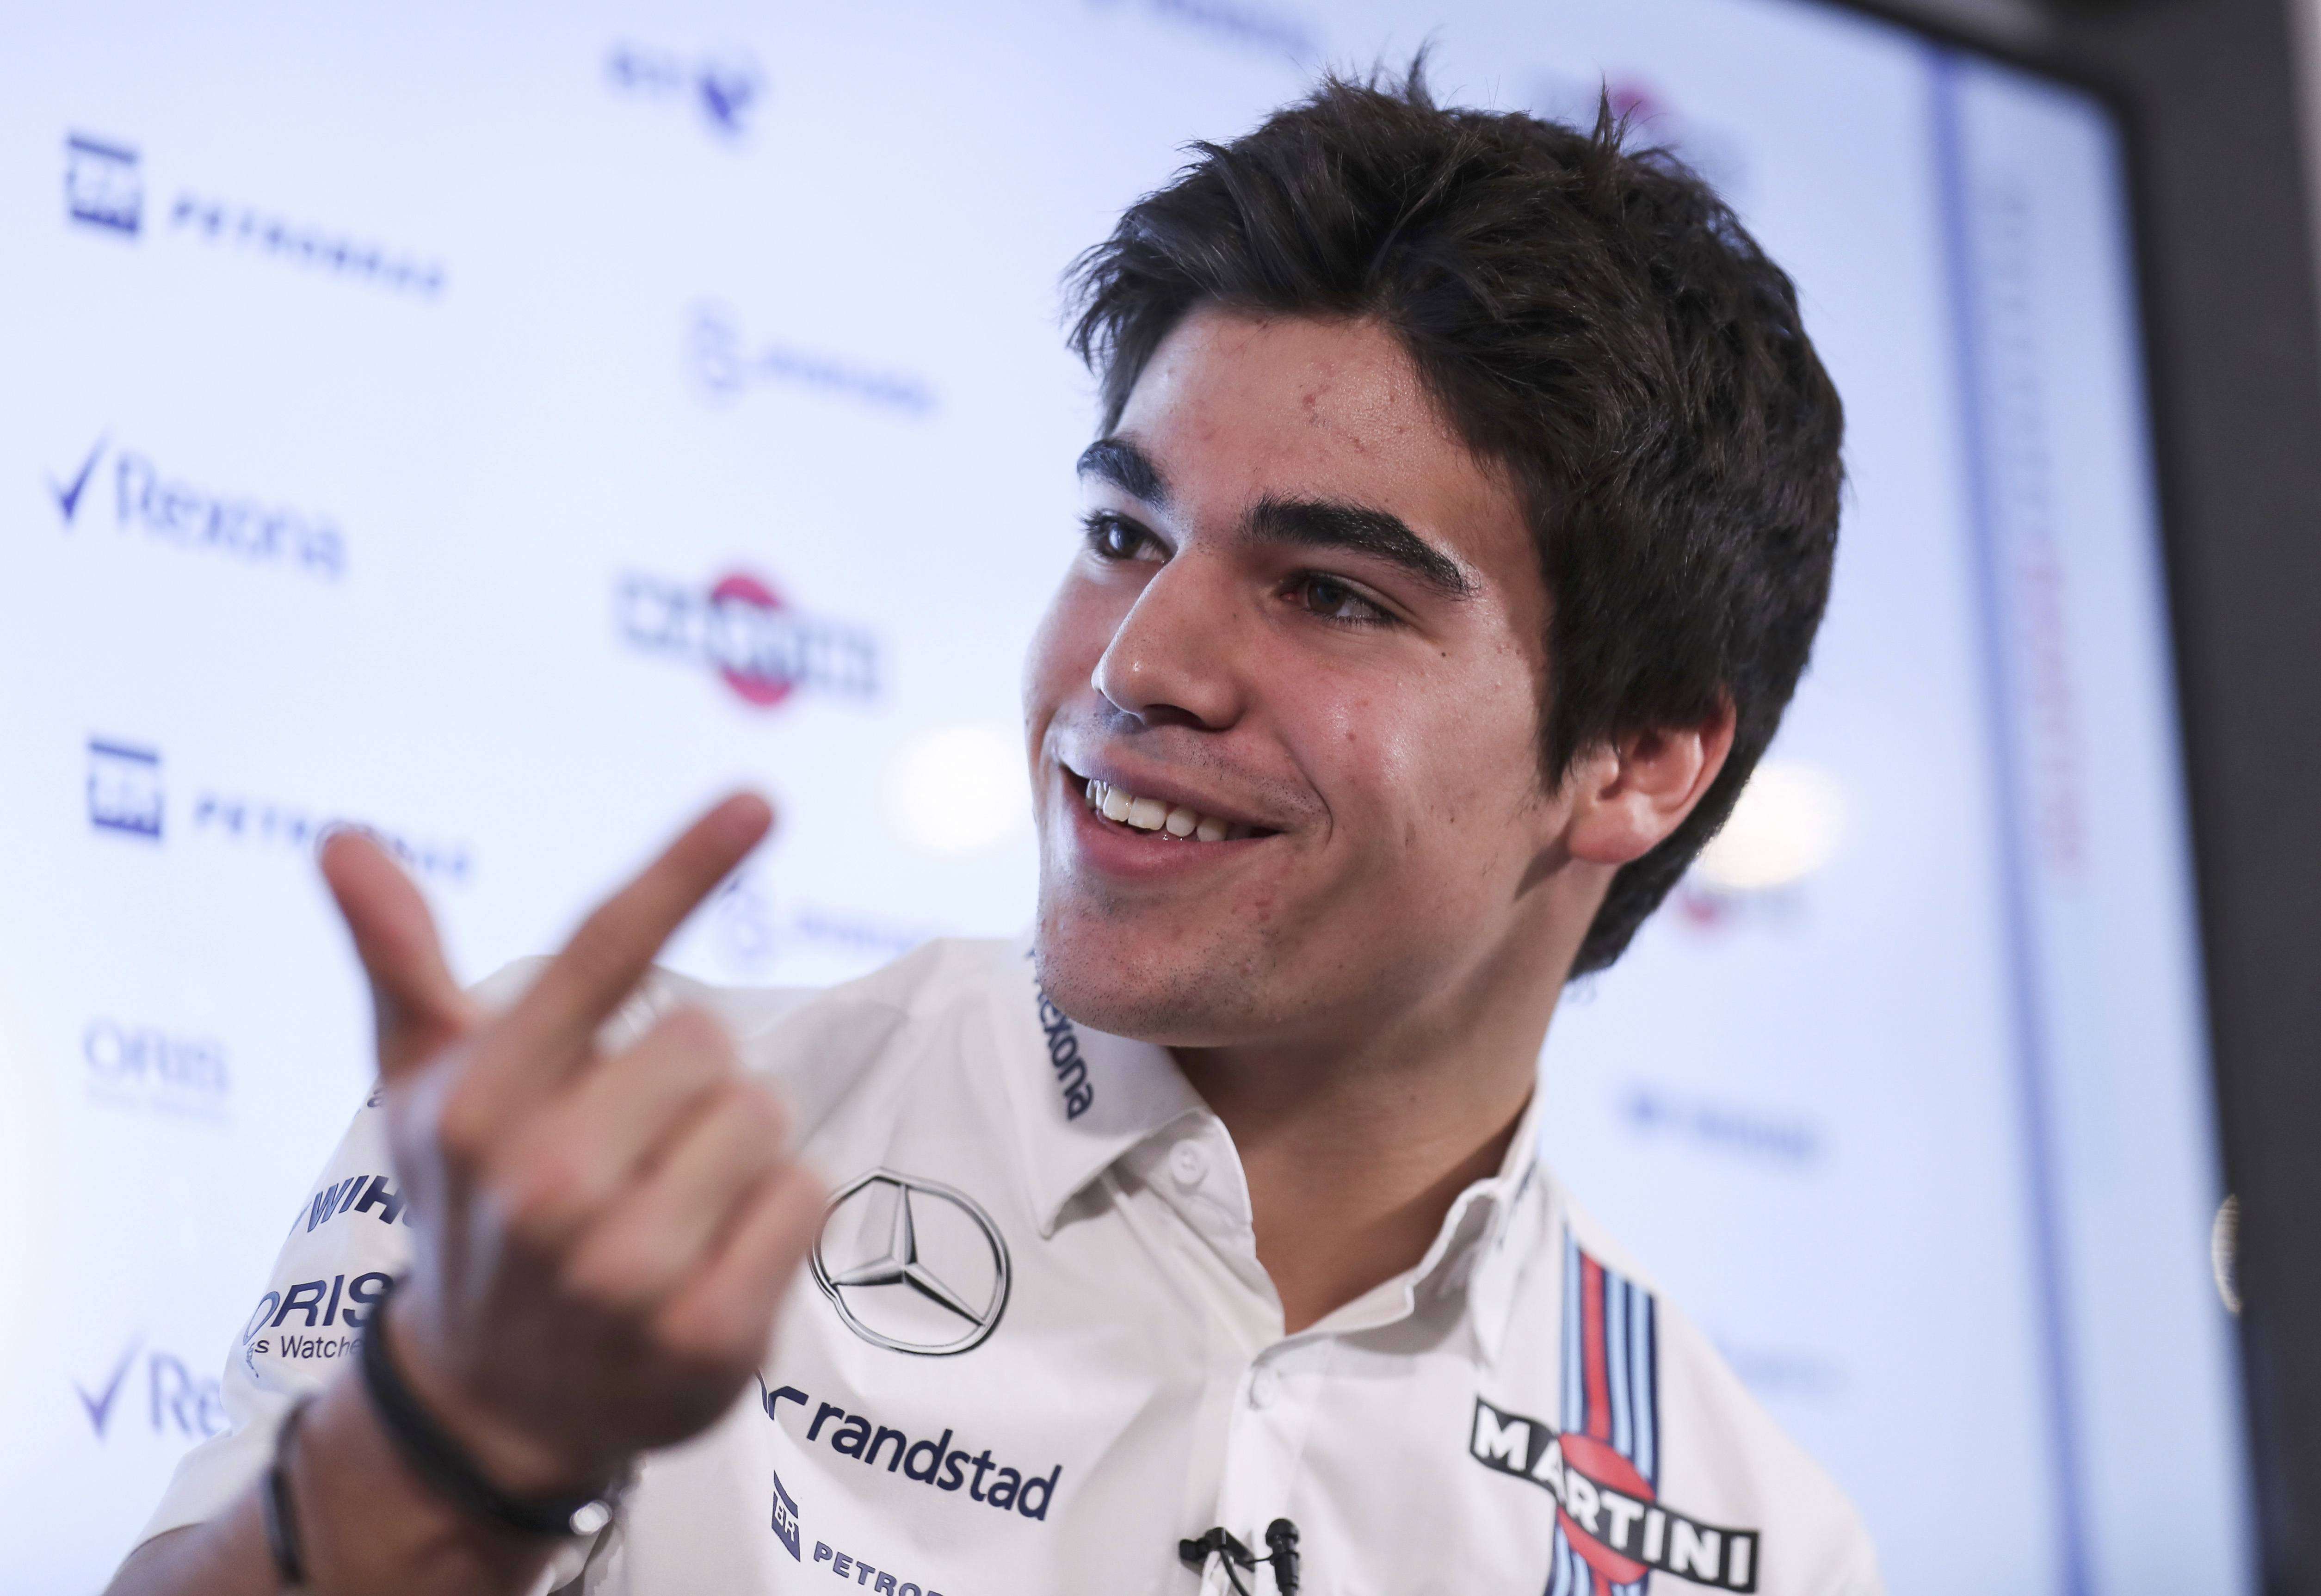 Canadian teenager Lance Stroll is unveriled as a Williams driver for next year’s Formula One season. Photo: Reuters